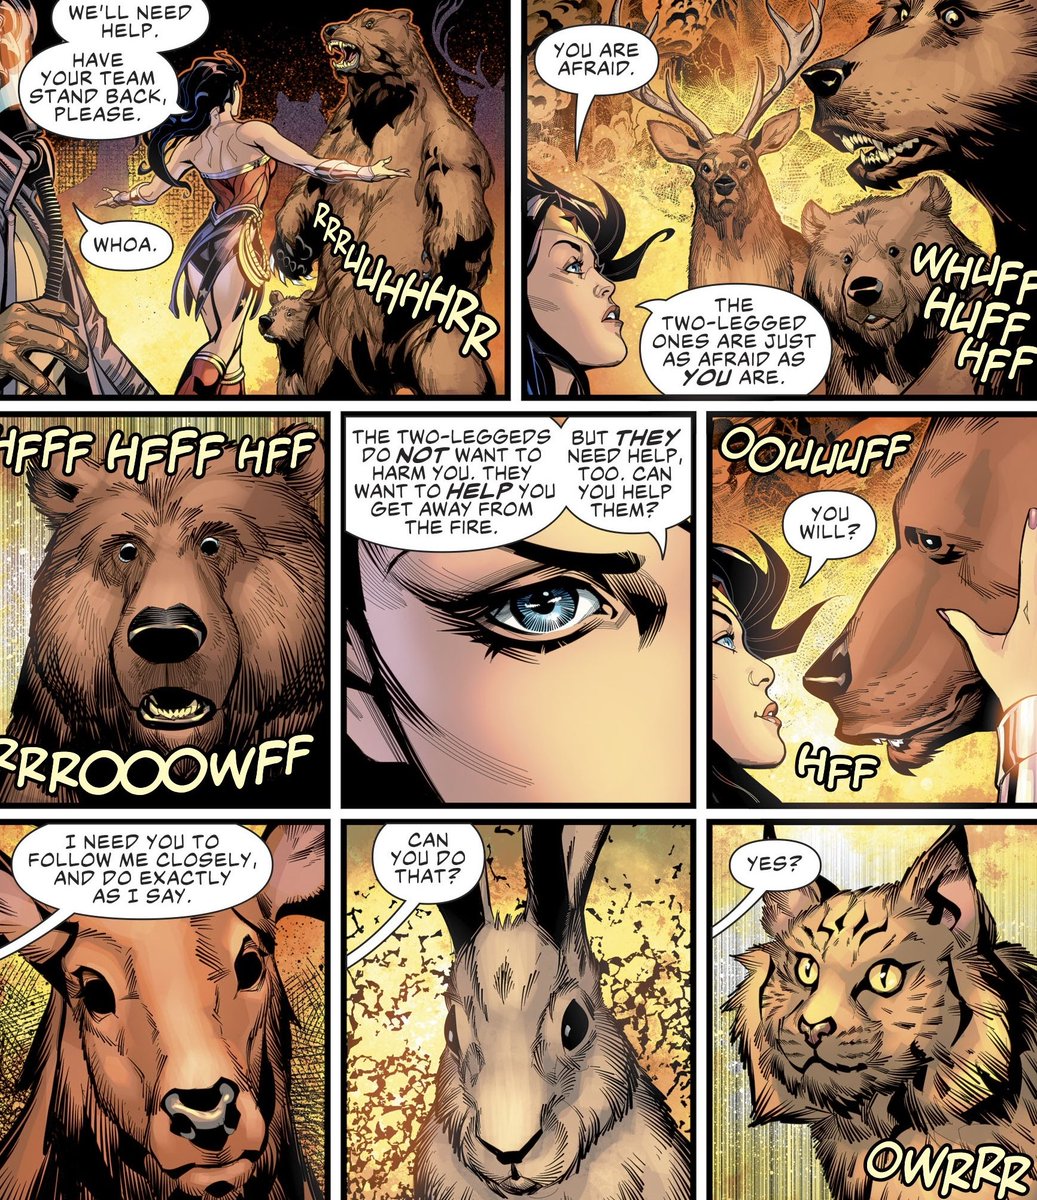 I lov Wonder Woman seeing communicate with animals and another magical creatures. This is due to the blessing of Artemis. This is very important to her mythos as it shows that Diana has storng connection to Gaea and all living things